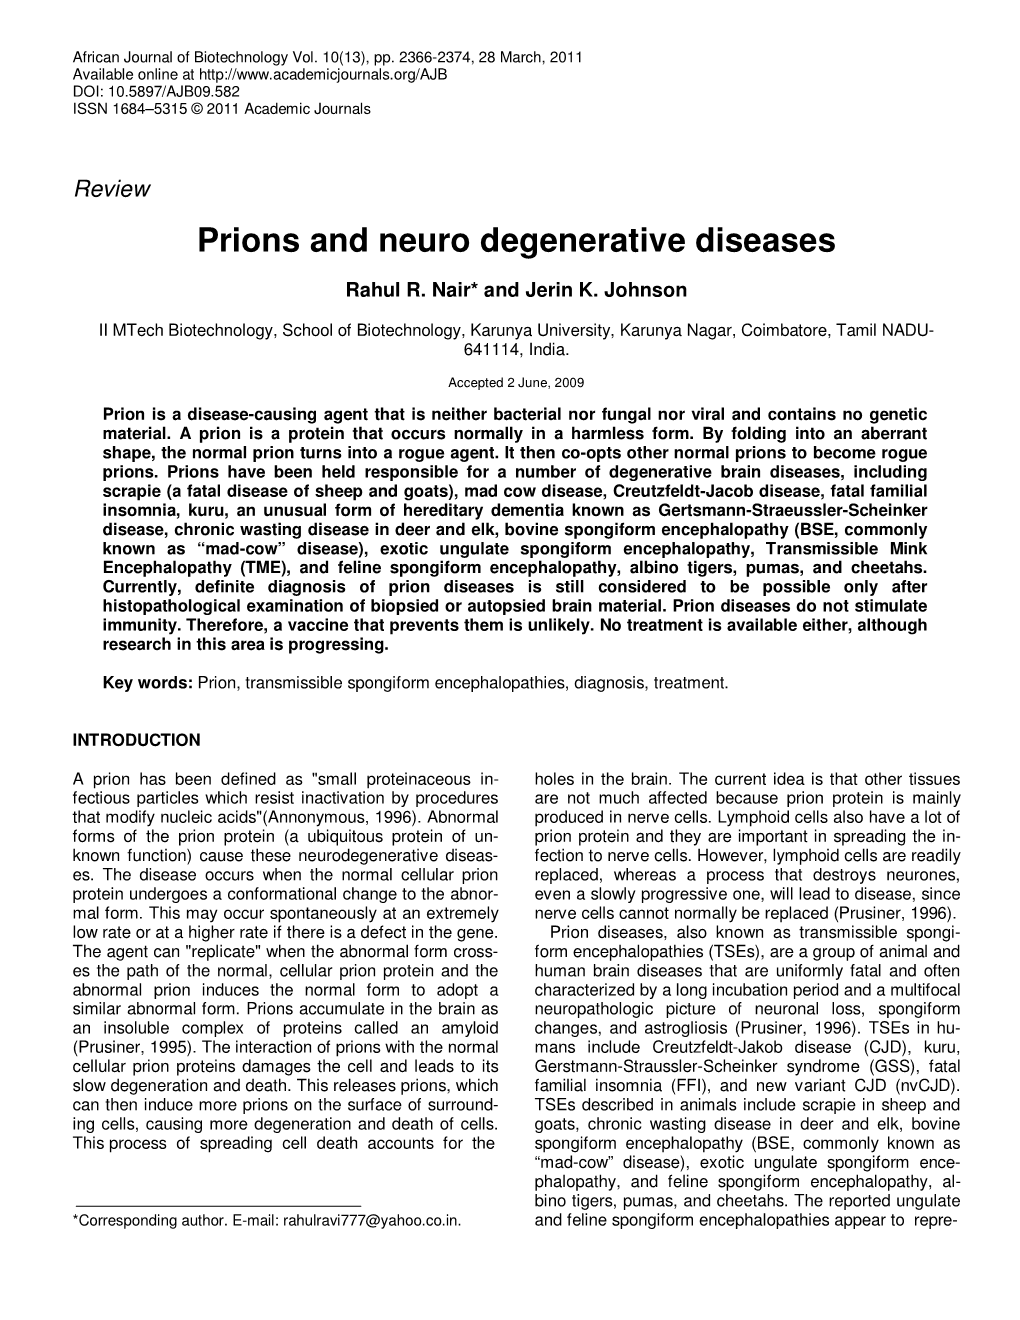 Prions and Neuro Degenerative Diseases